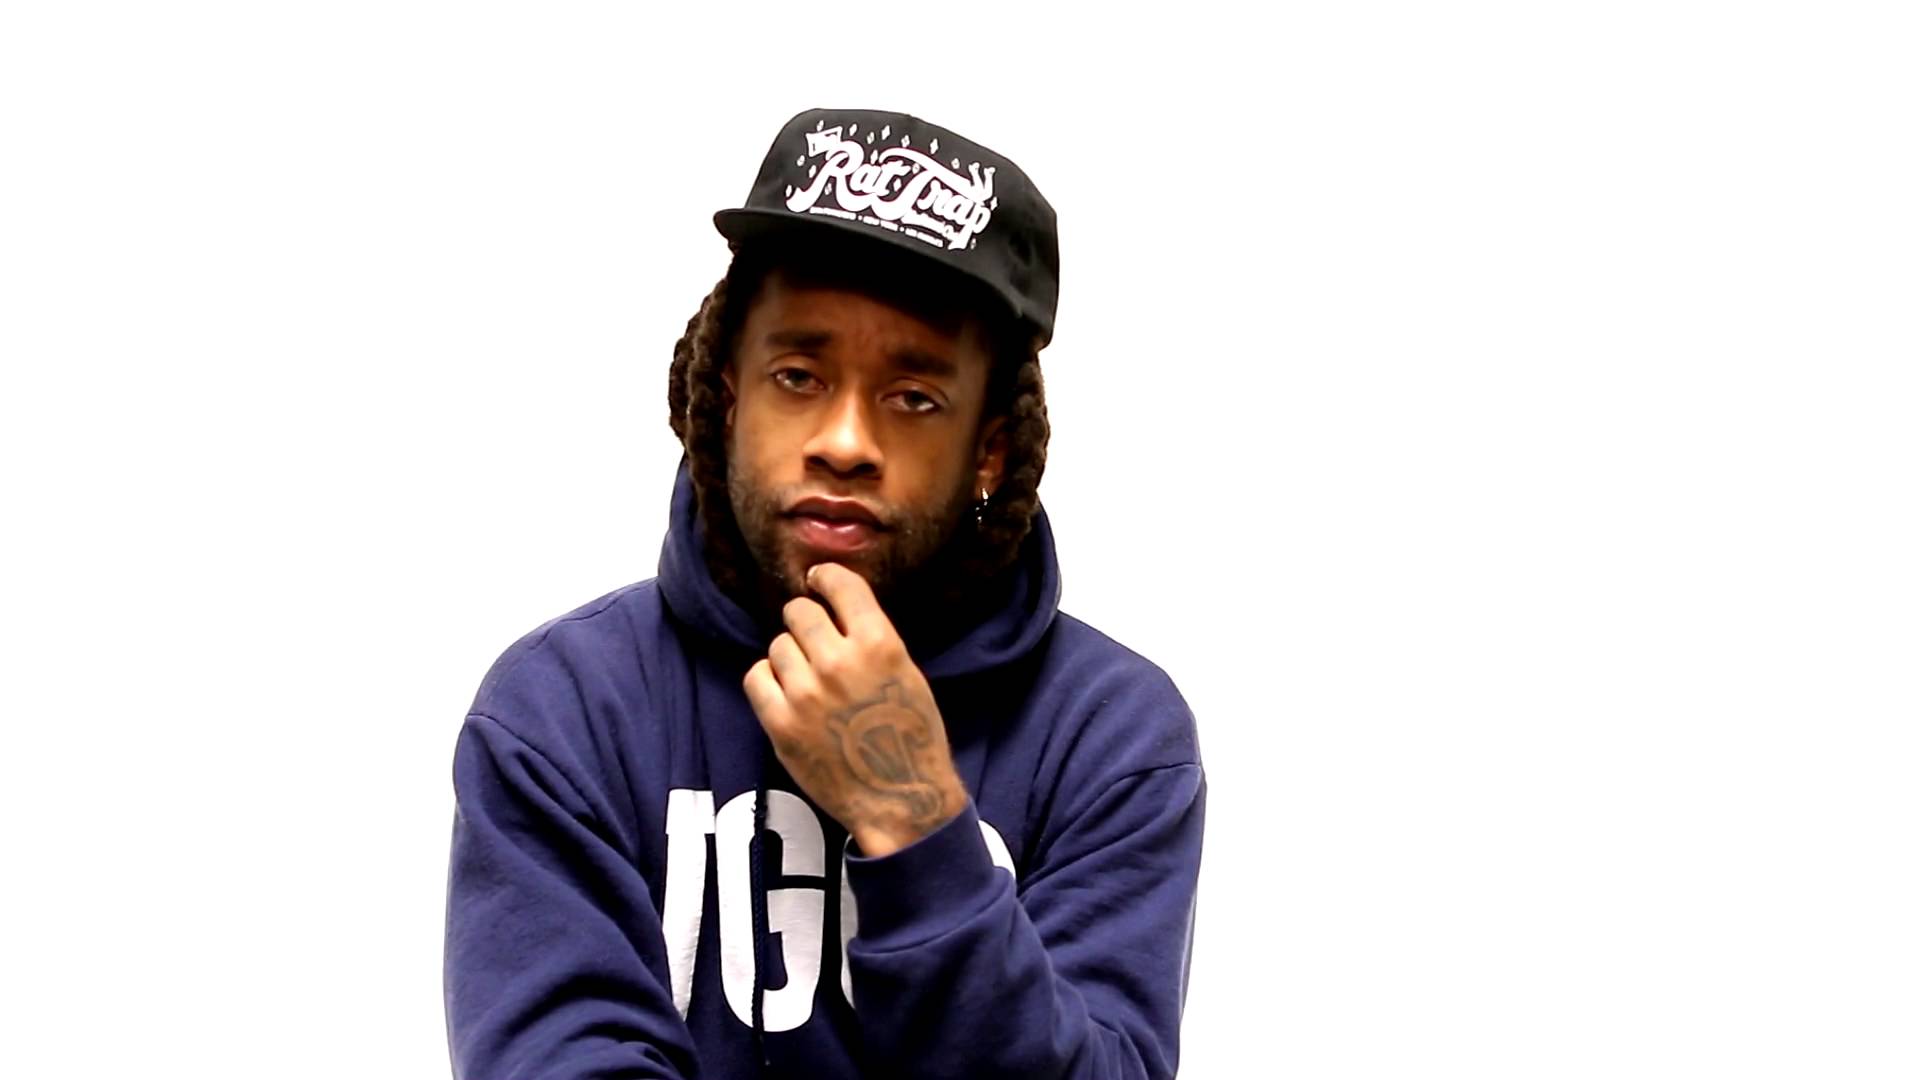 Ty Dolla Sign Discusses DJing as DJ Double Dolla Sign and Wiz